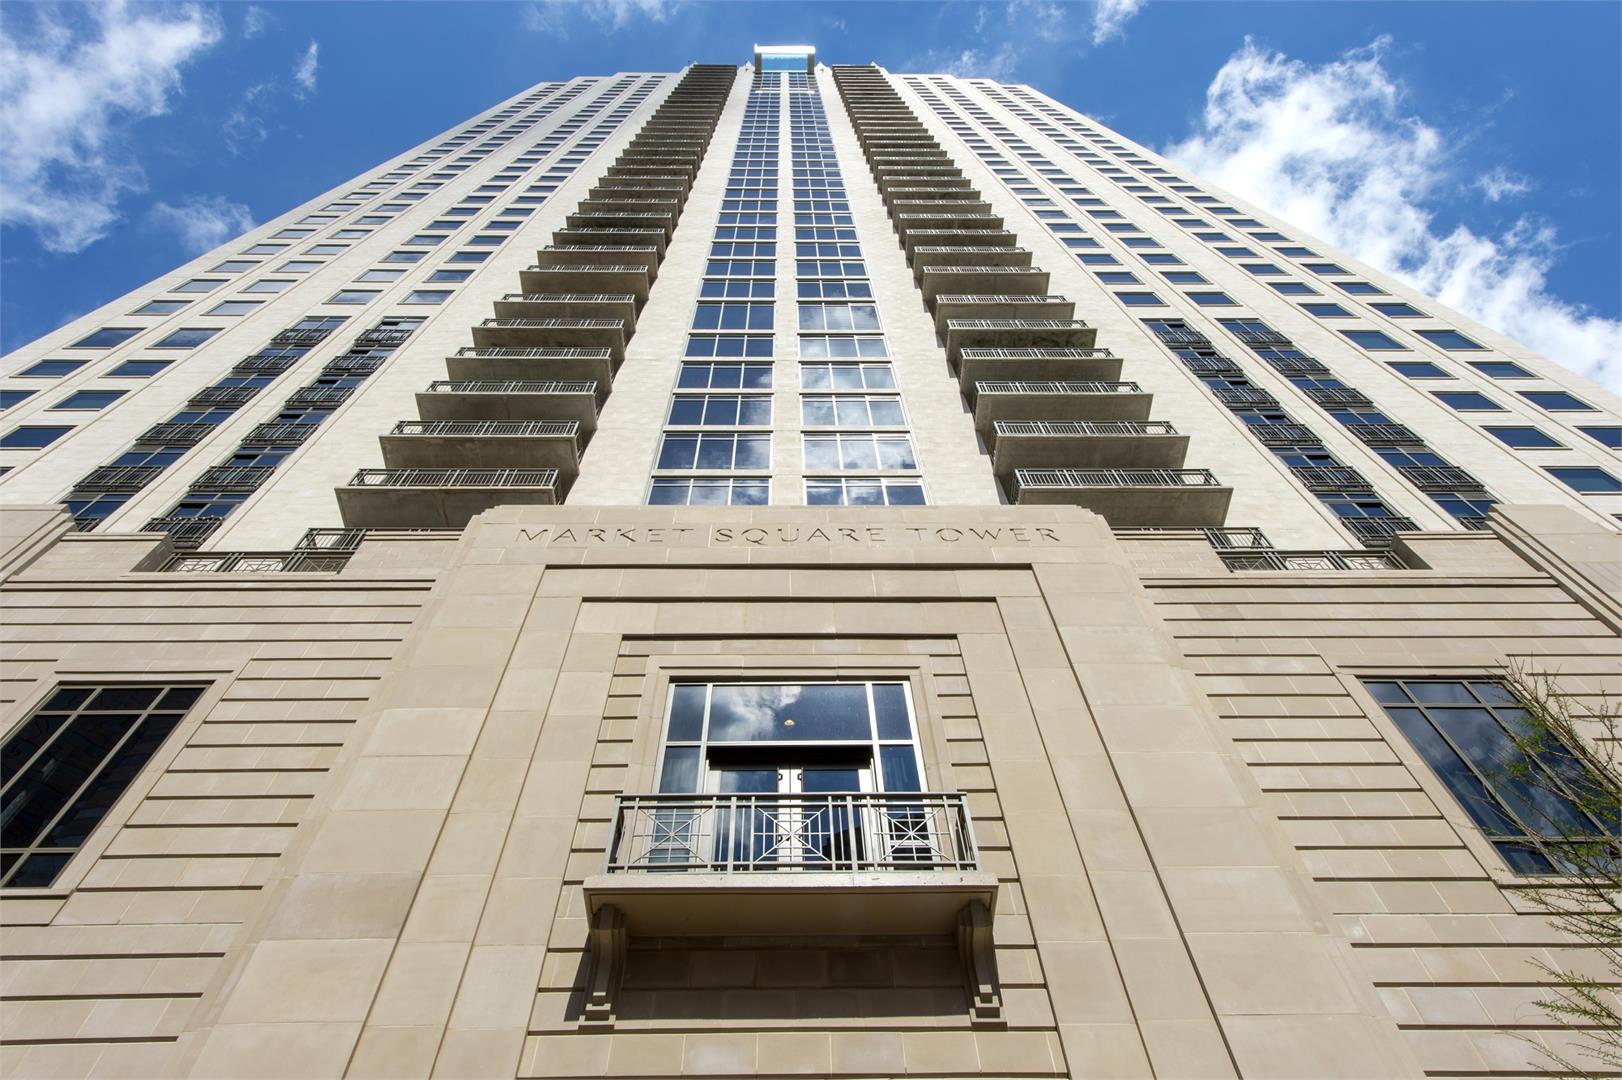 Dramatic view of exterior elevation of Market Square Tower Apartment Building in Houston, Texas